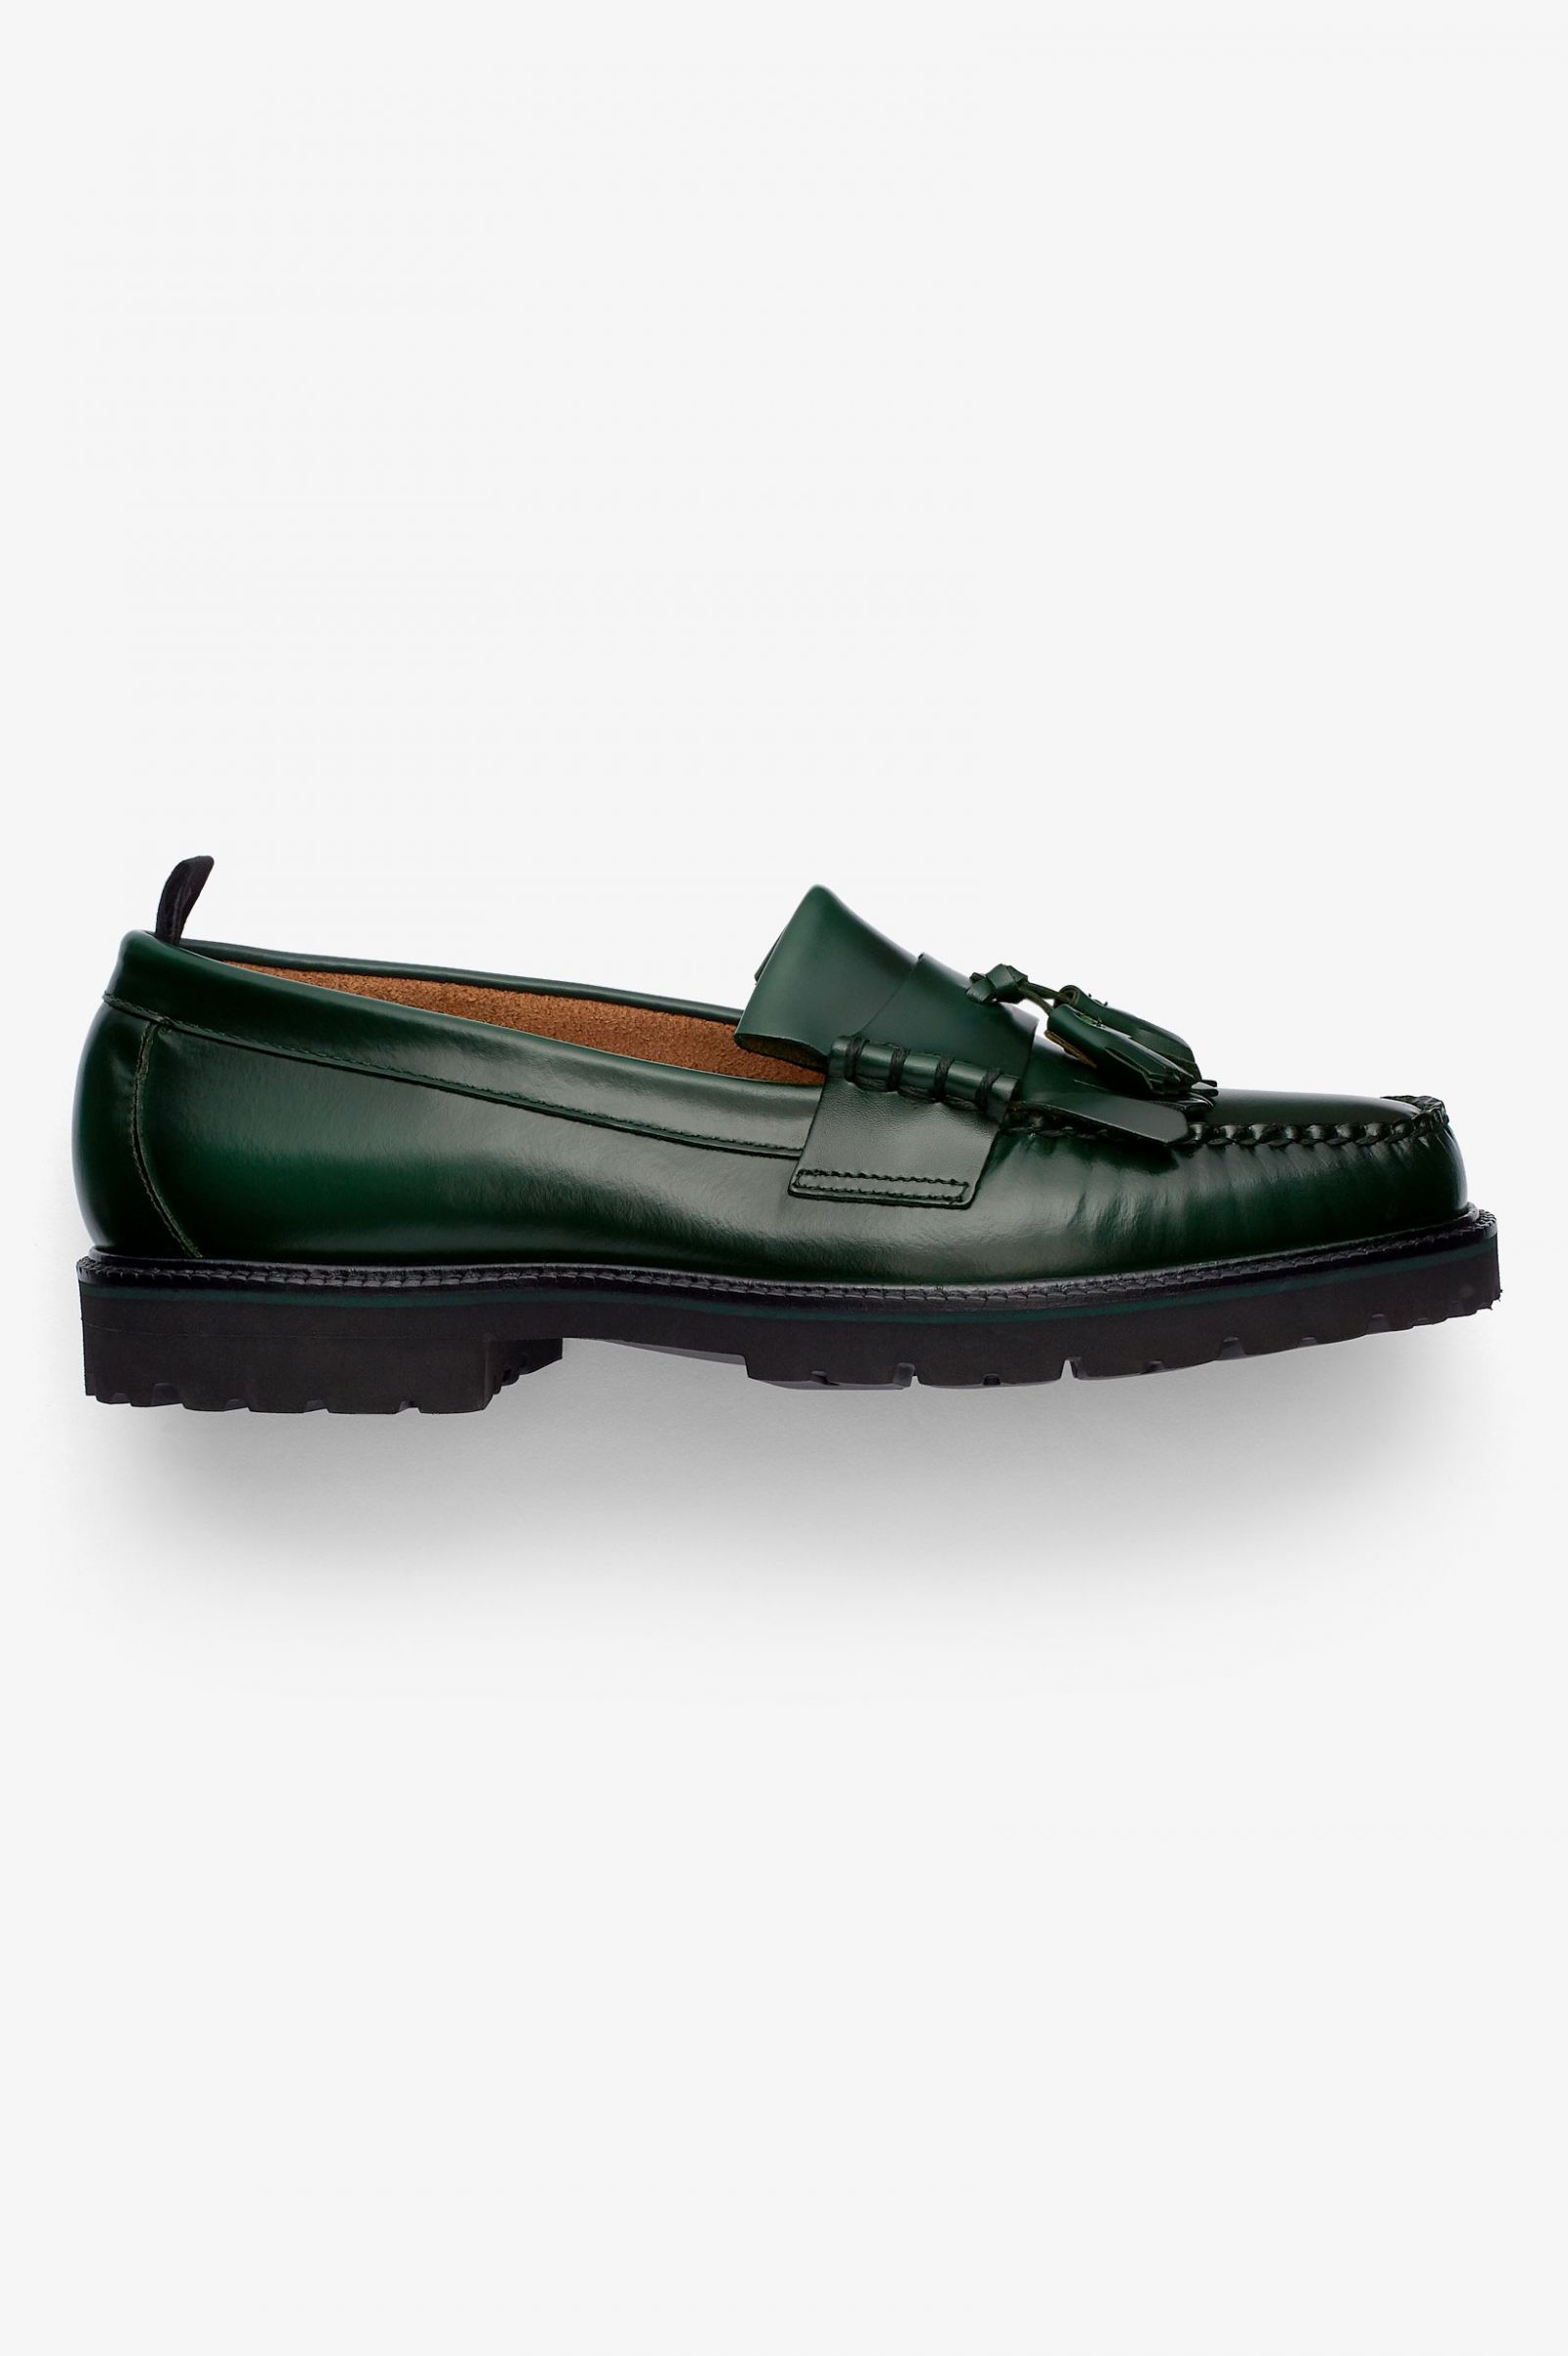 fred perry x george cox tassel loafer